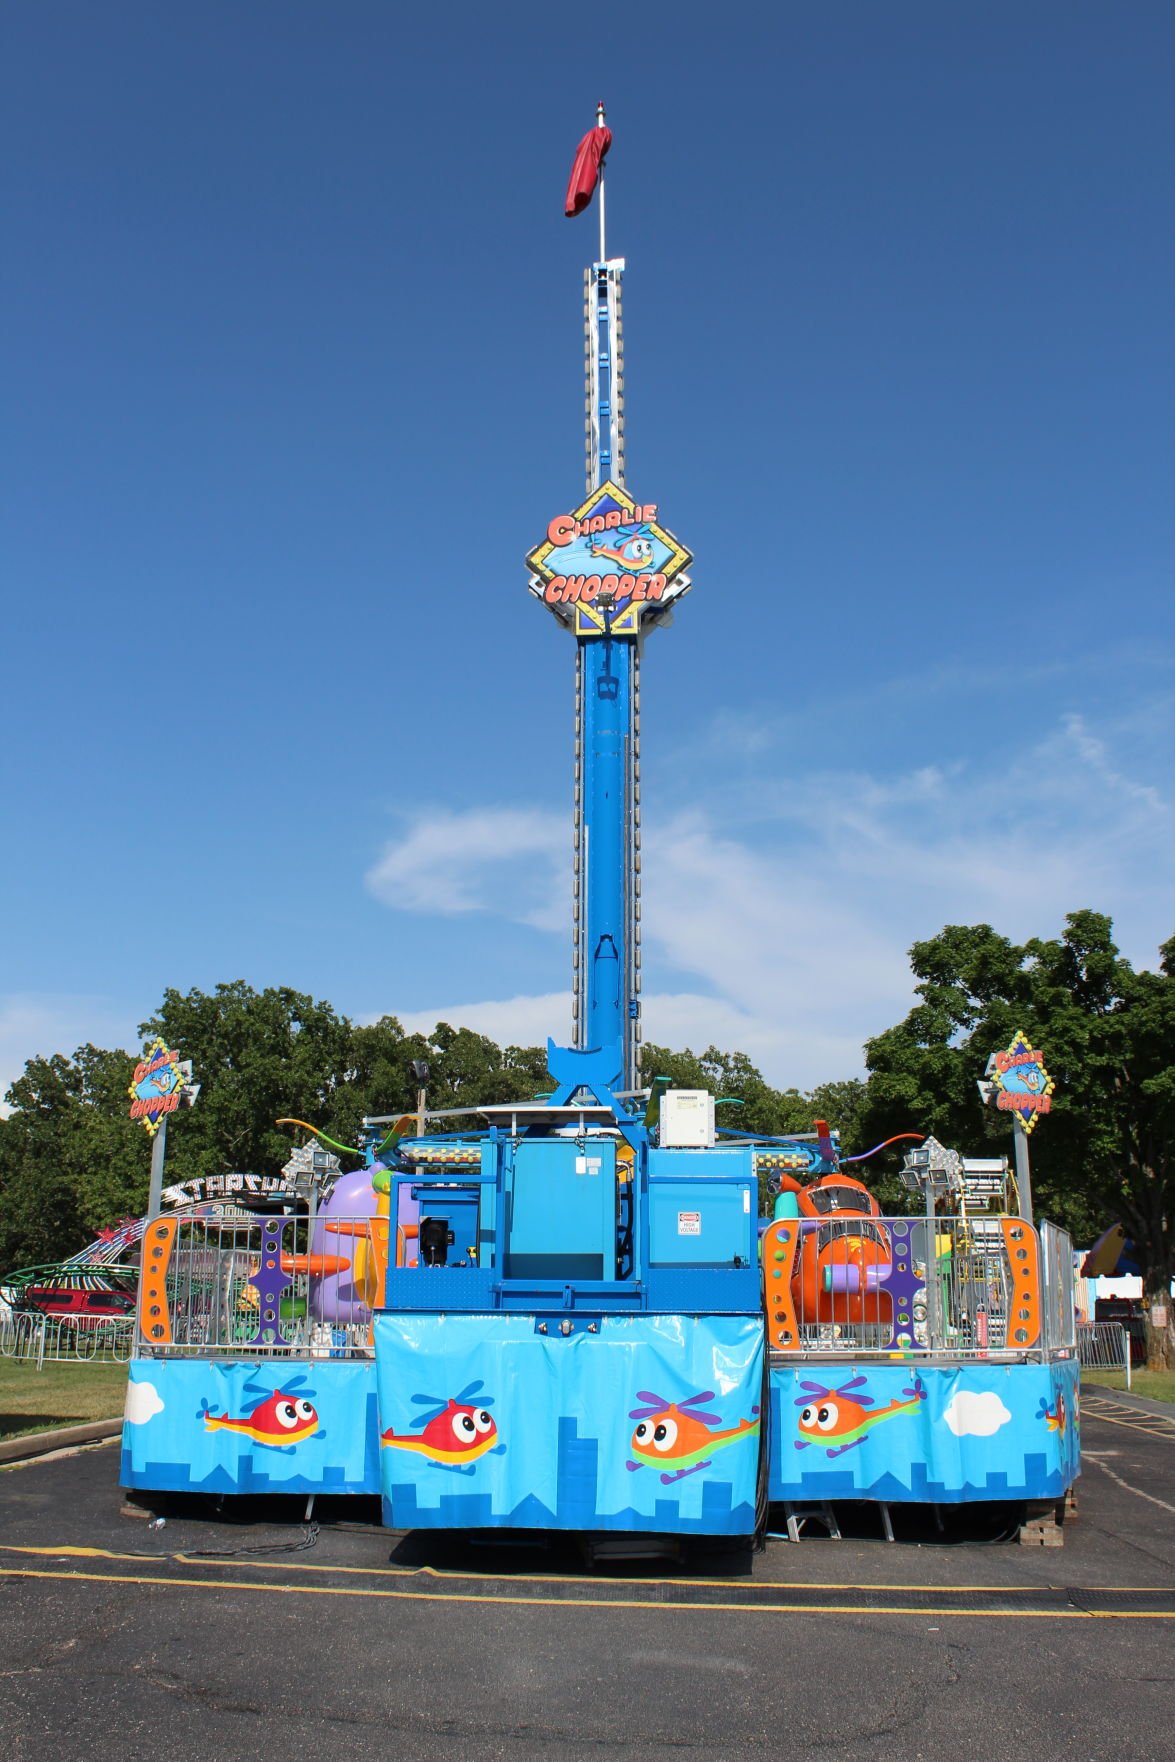 Rolla Lions Club Carnival opens today, fireworks start at 10 p.m